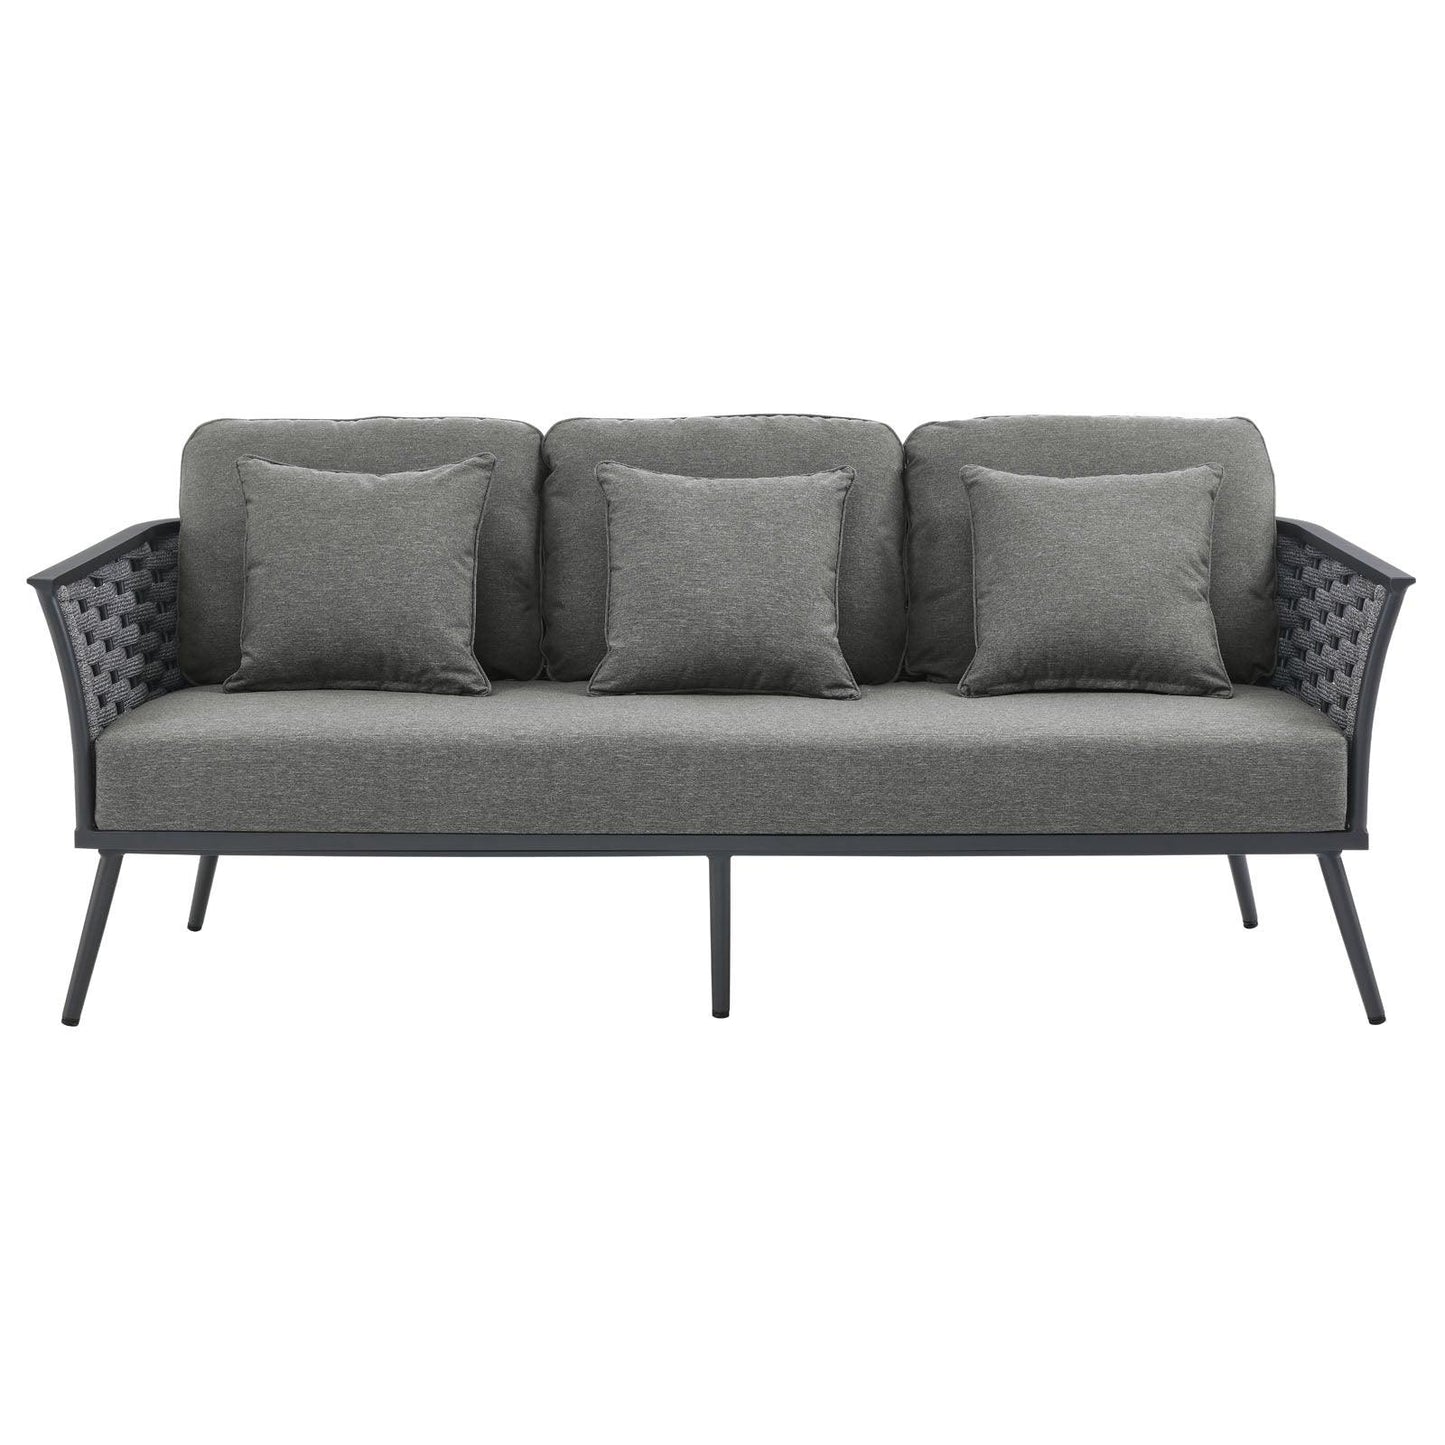 Modway Stance Outdoor Patio Aluminum Sofa FredCo